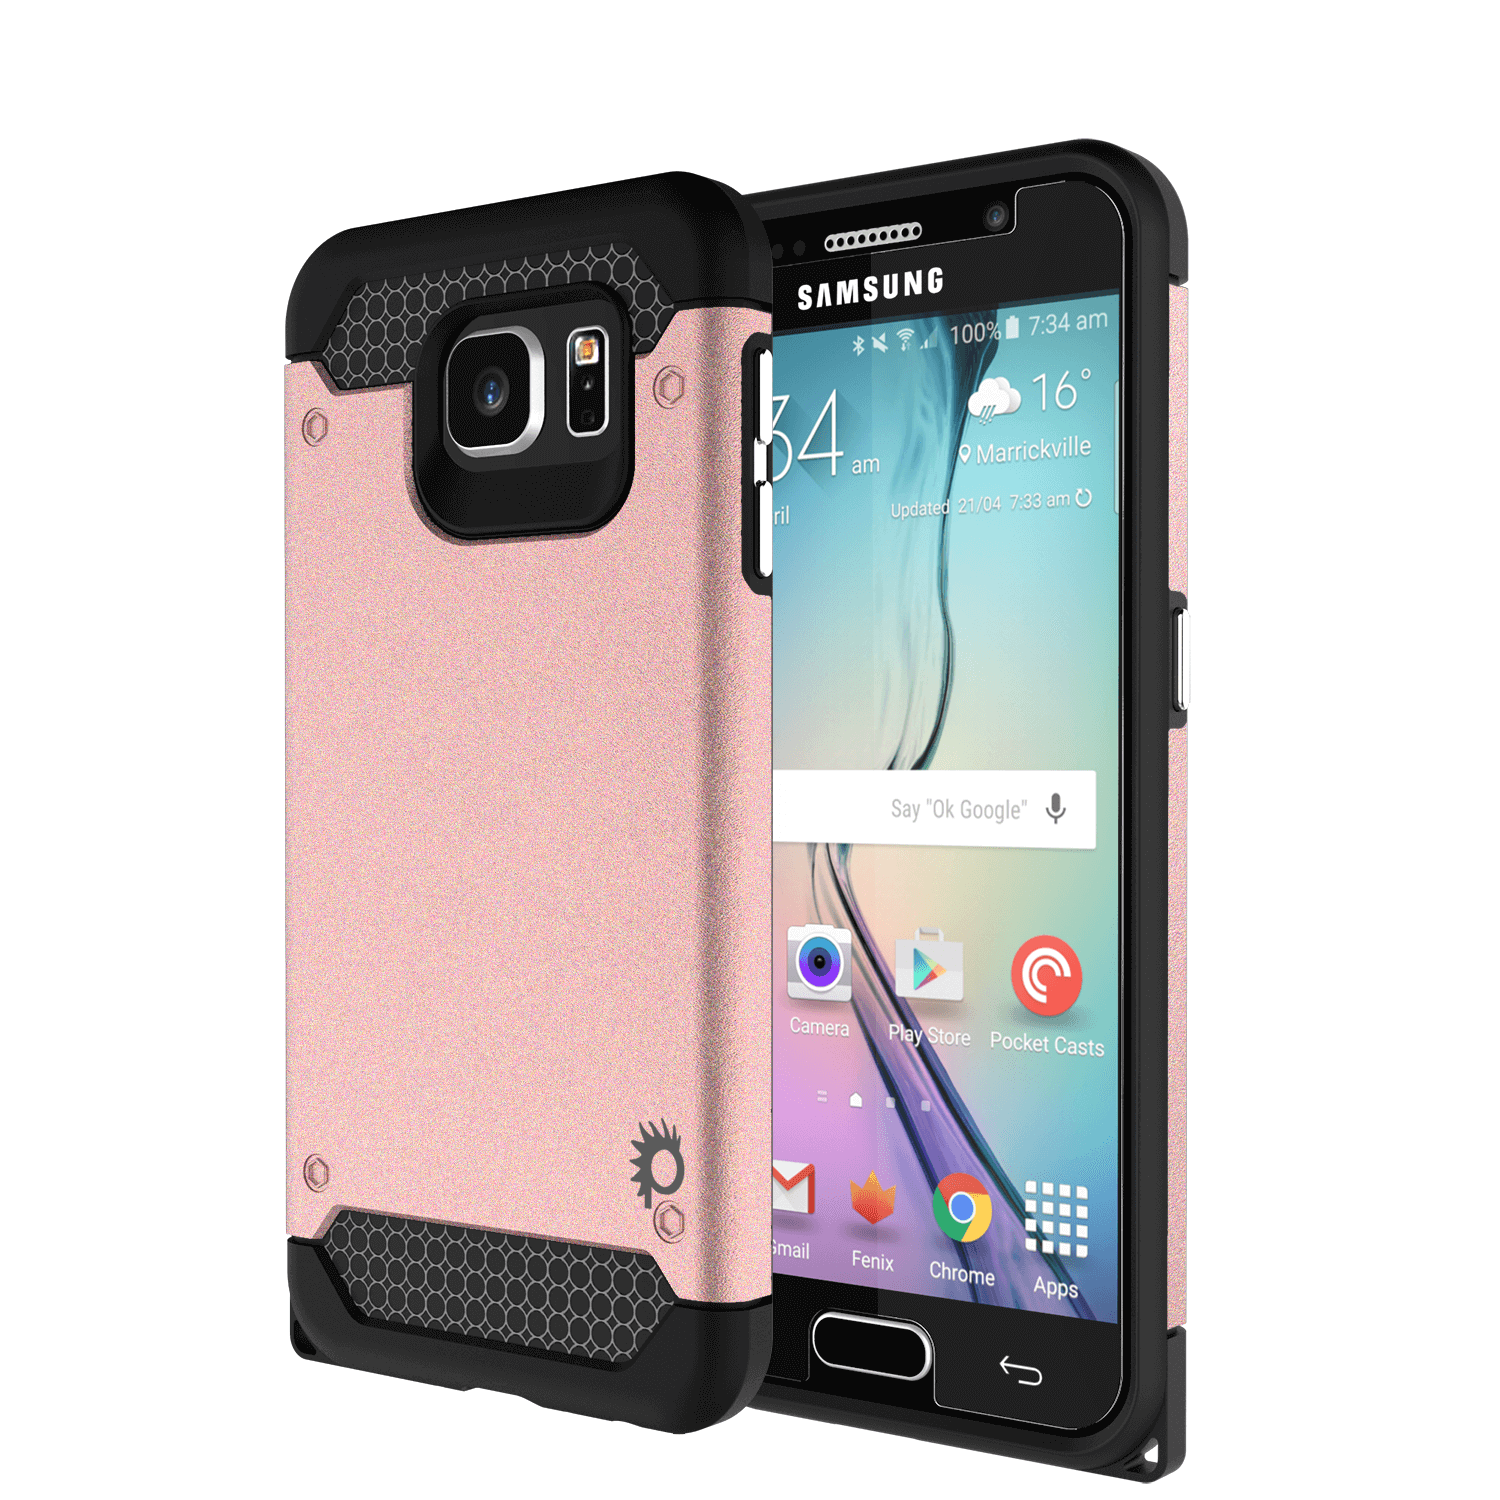 Galaxy s6Case PunkCase Galactic Rose Gold Series Slim Protective Armor Soft Cover Case w/ Tempered Glass Protector Lifetime Warranty